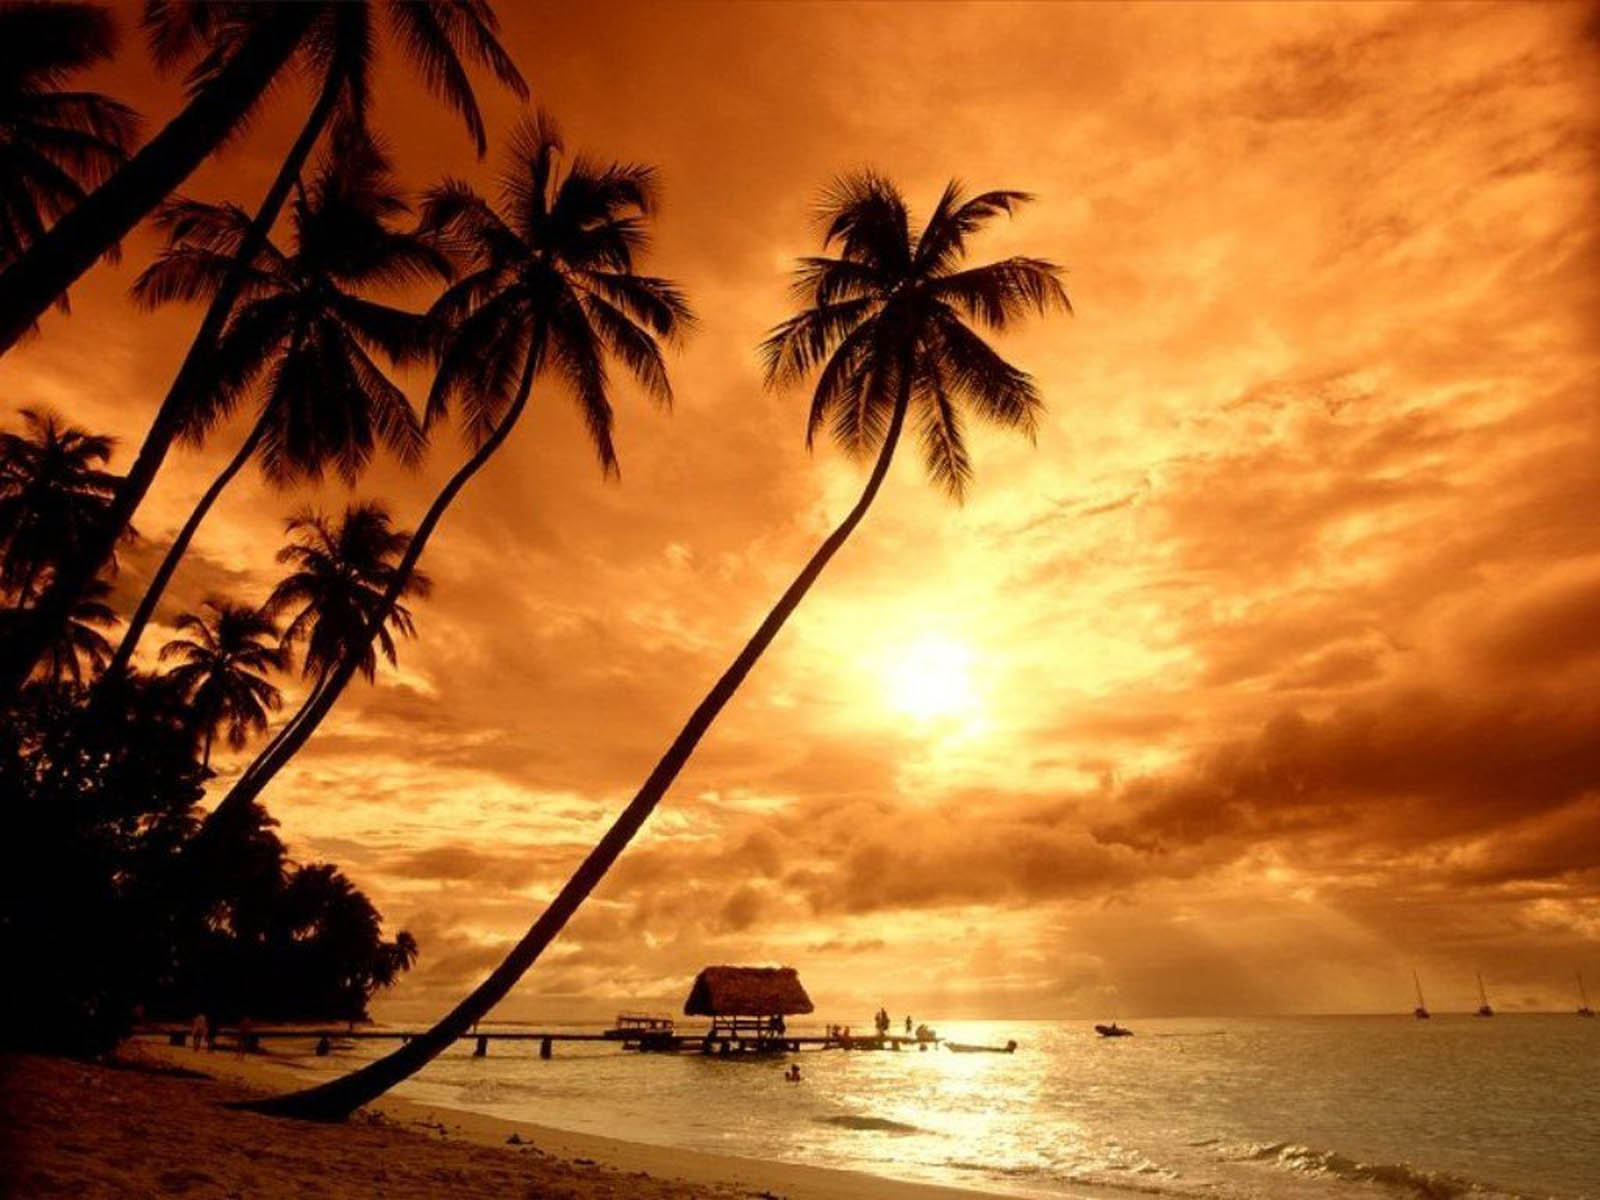 Island Sunset Wallpaper Image Photos Pictures And Background